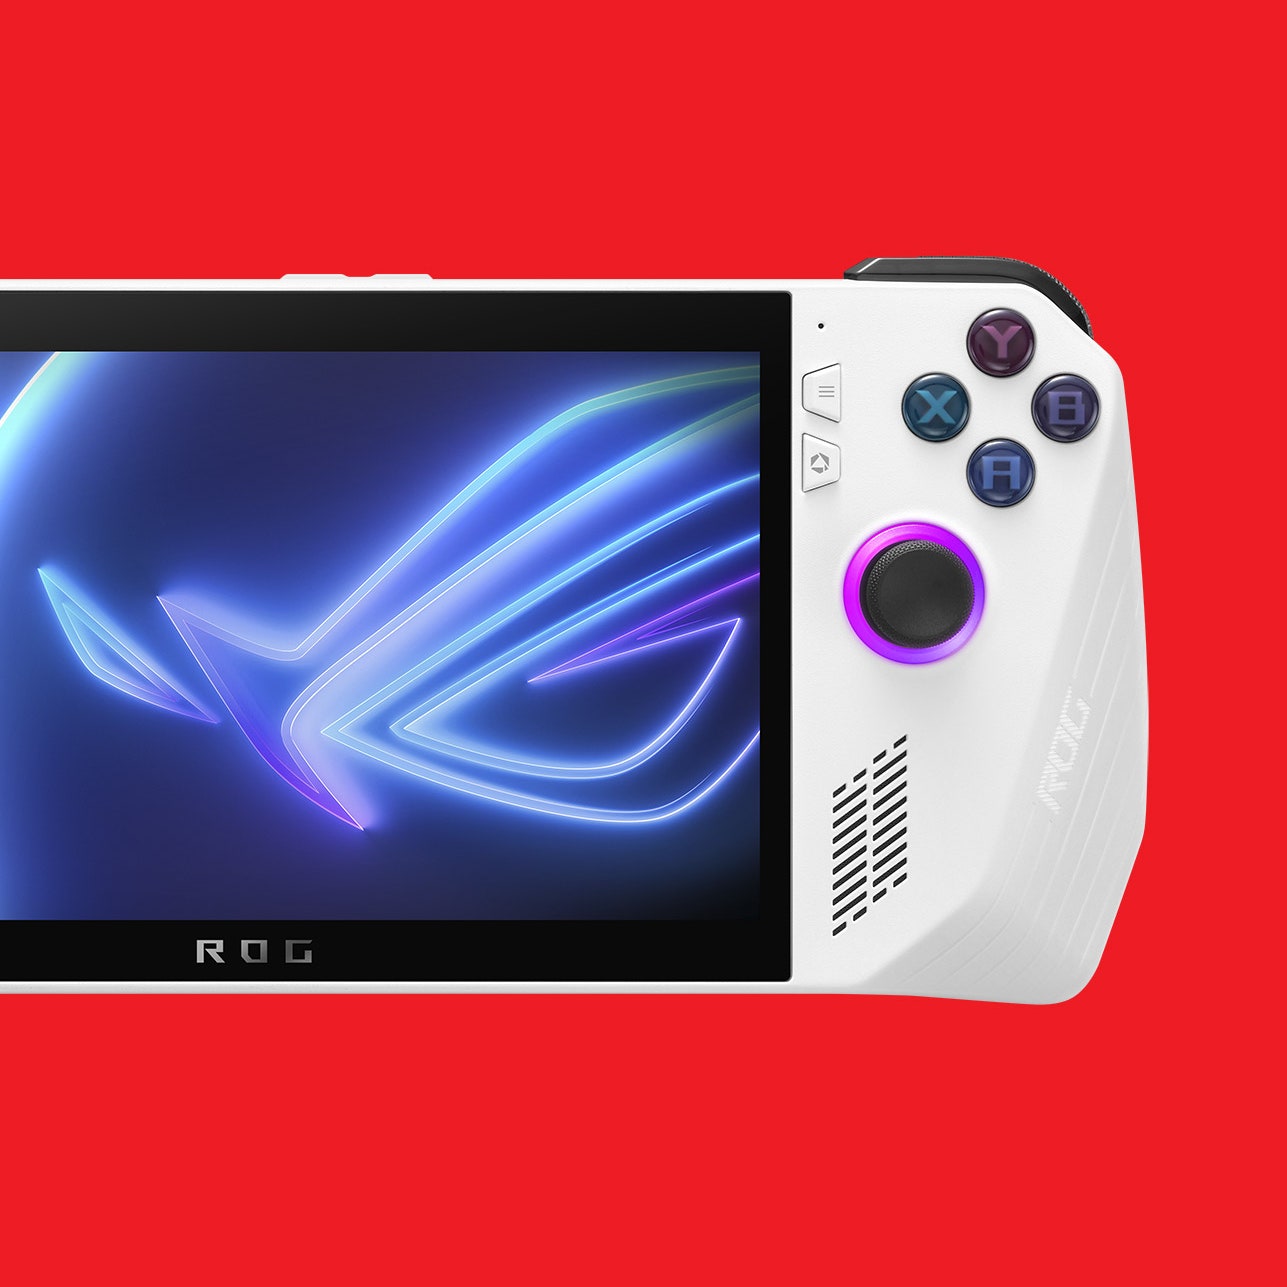 Asus’ New Handheld Can Run Your PC Games (for an Hour or Two)